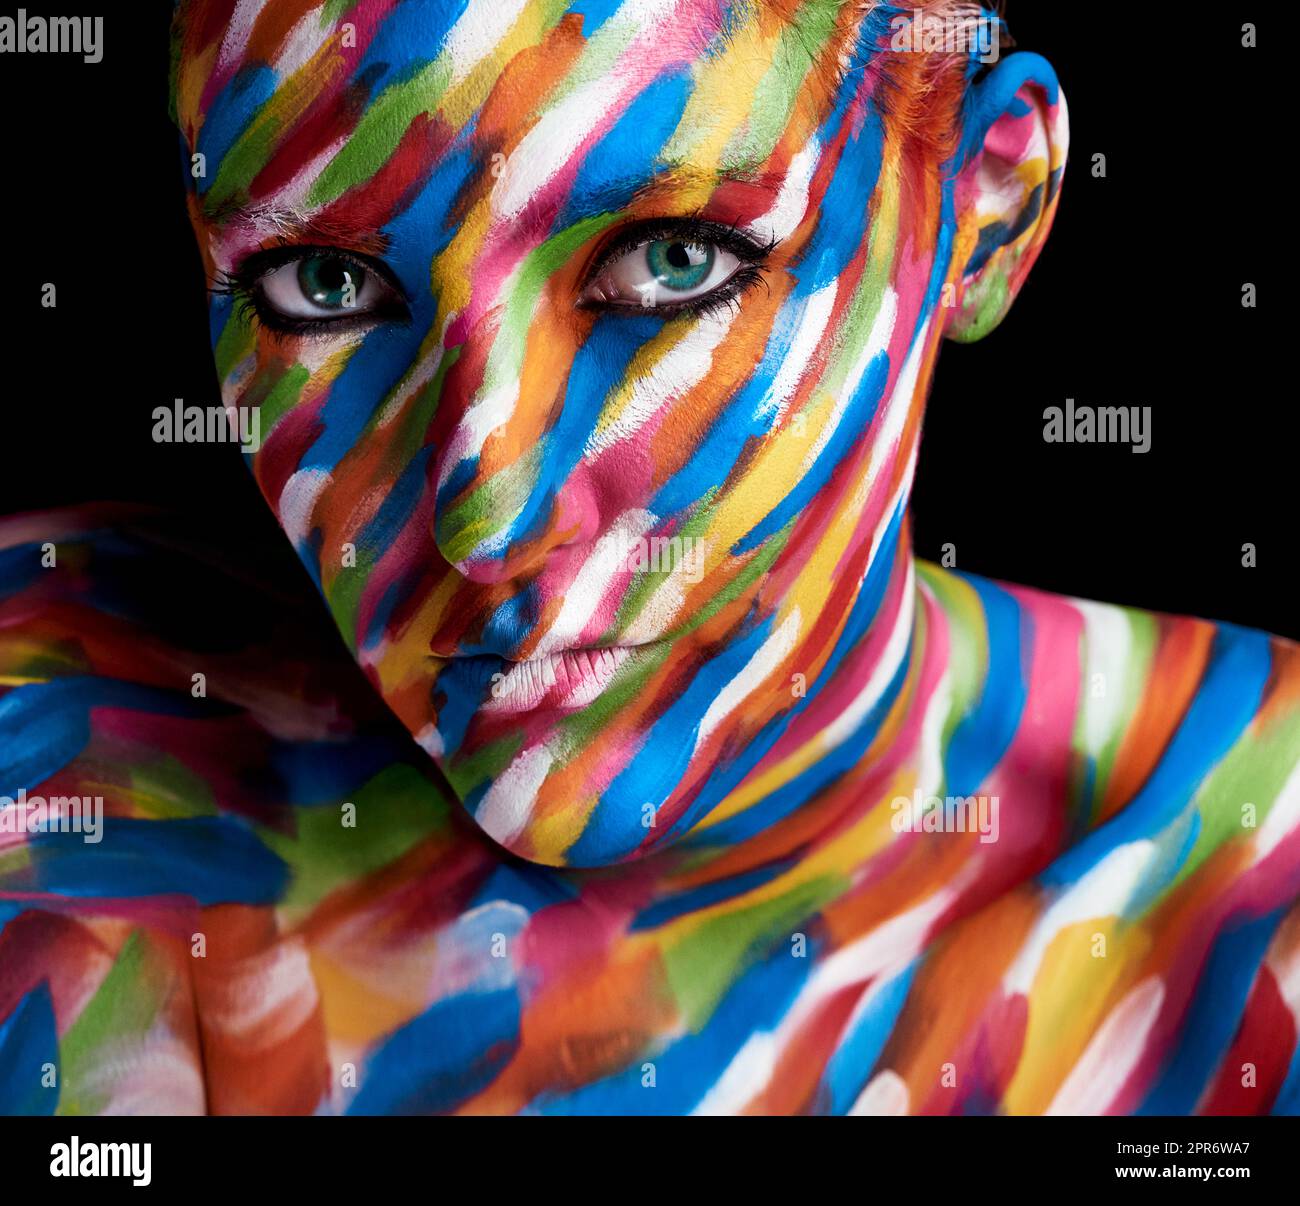 Clothed in colour. Cropped portrait of a young woman posing with paint on her face. Stock Photo